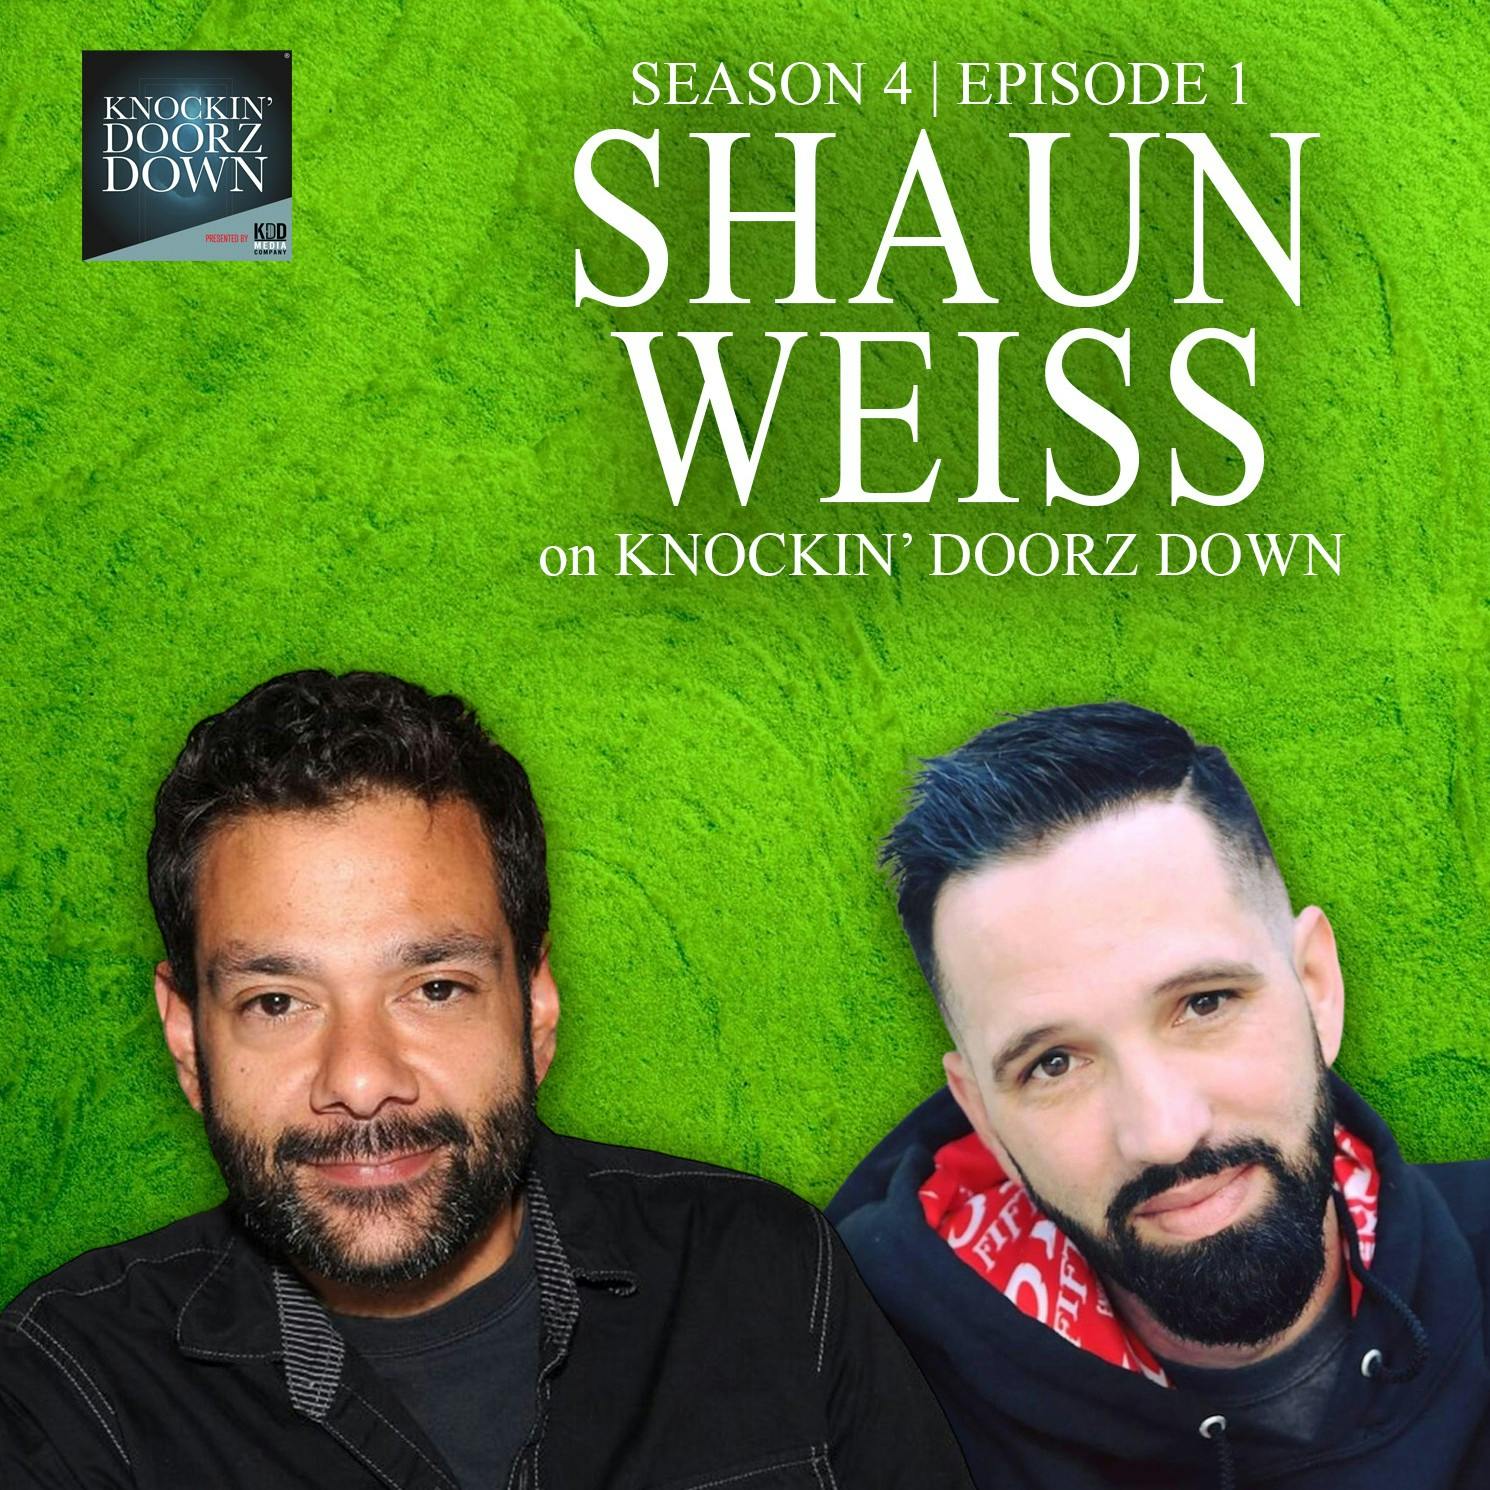 Shaun Weiss | The Mighty Ducks Goldberg, Publicized Addiction, Parent With Addiction, Sobriety And Recovery